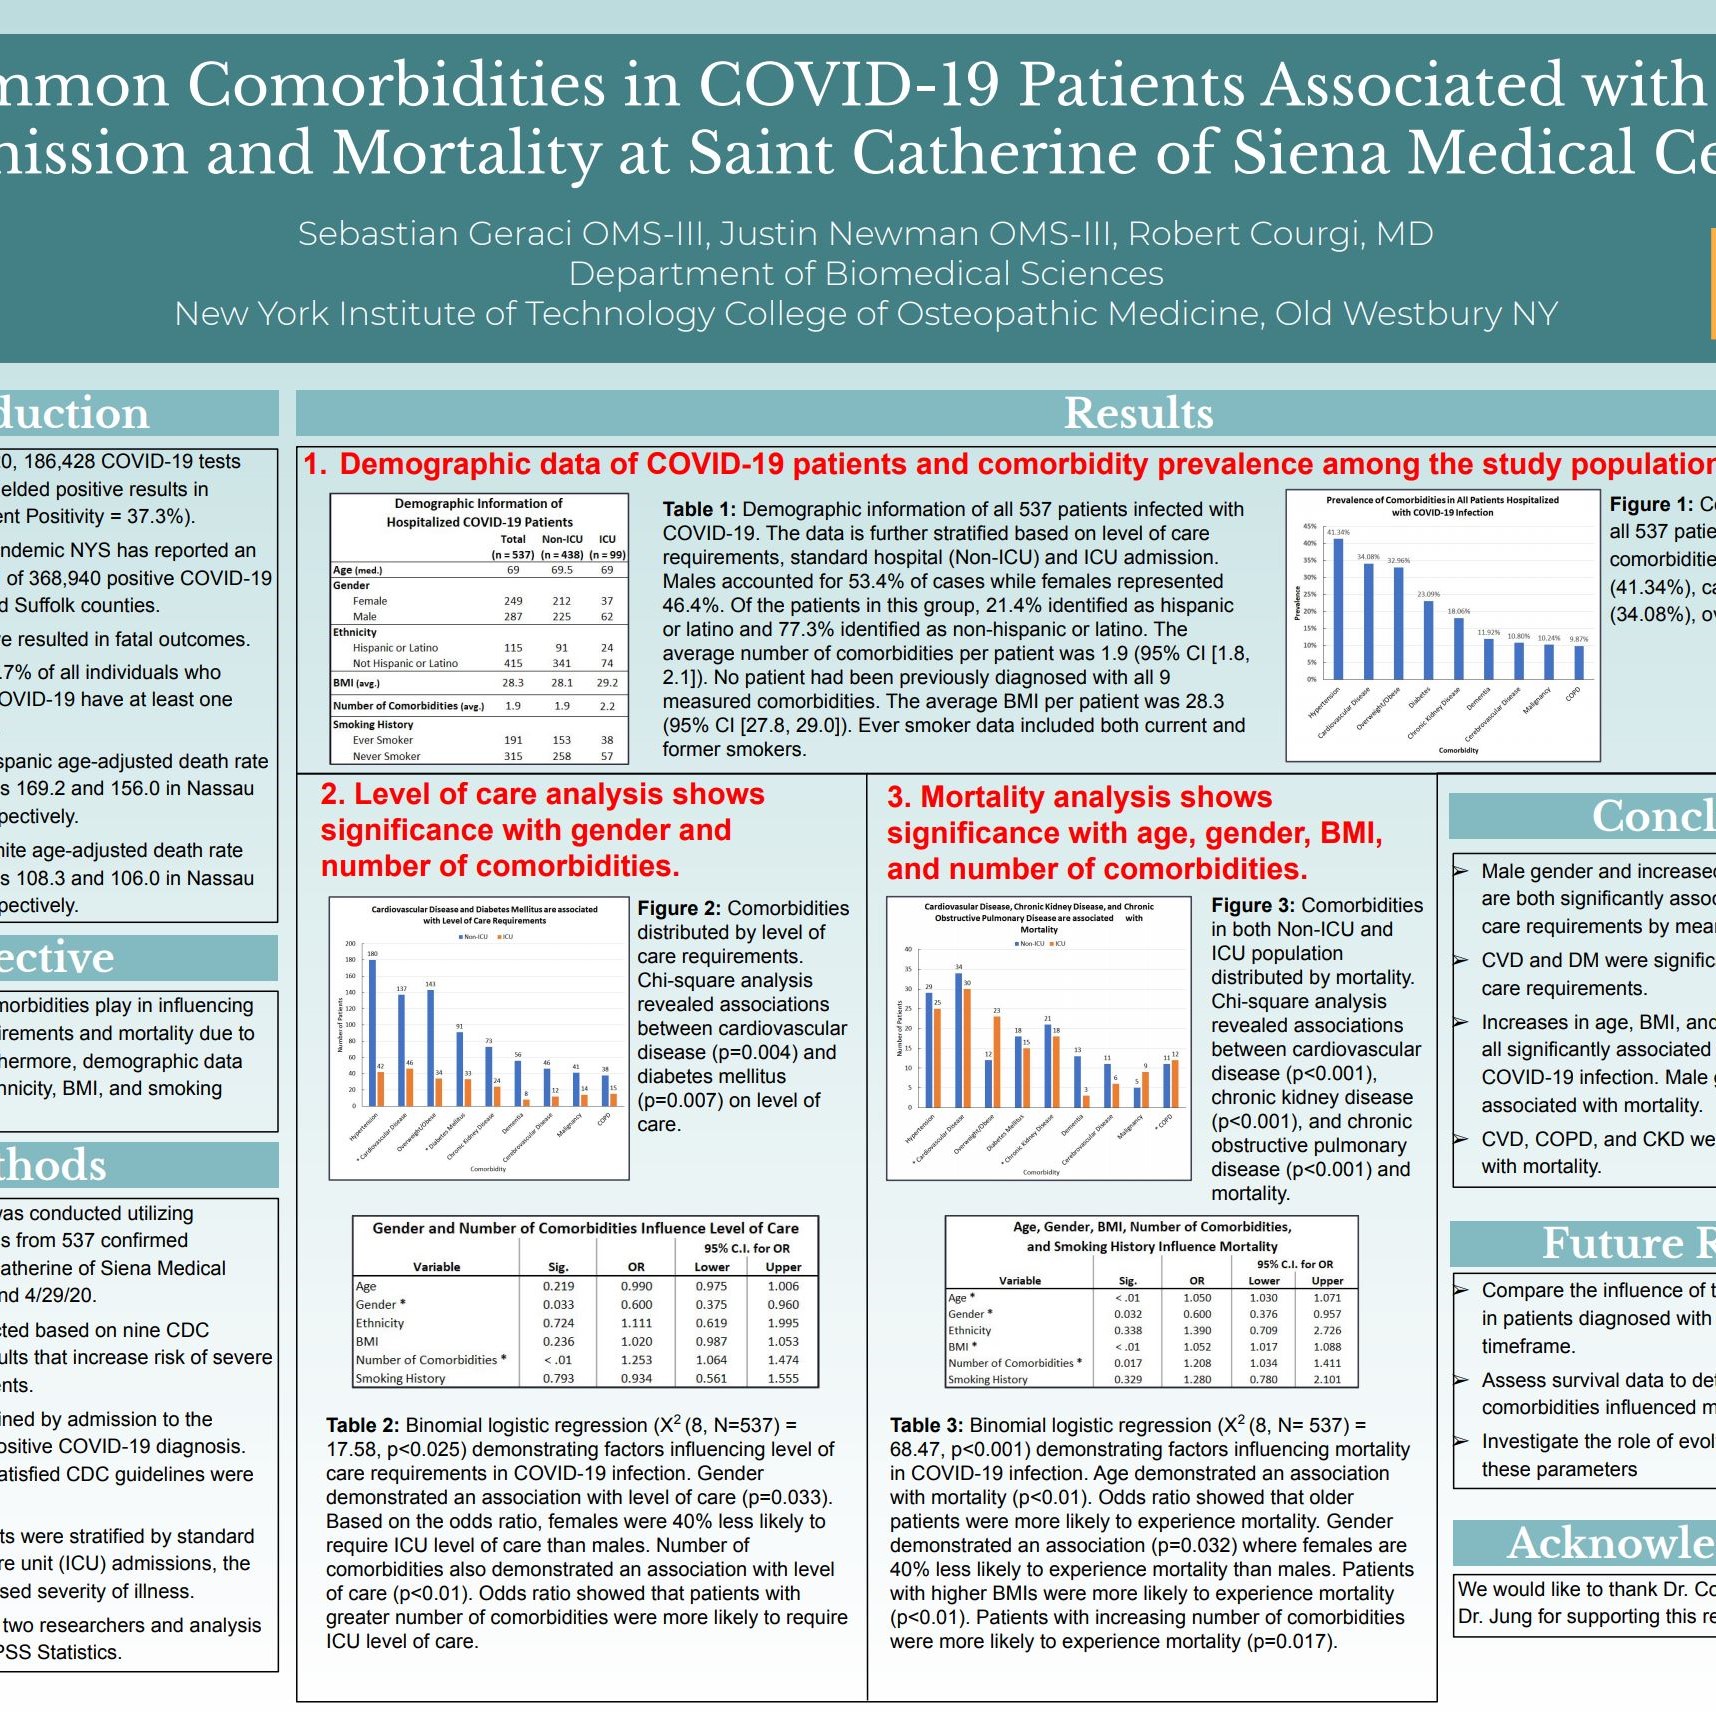 Common Comorbidities in COVID-19 Patients Associated With ICU Admission and Mortality at Saint Catherine of Siena Medical Center